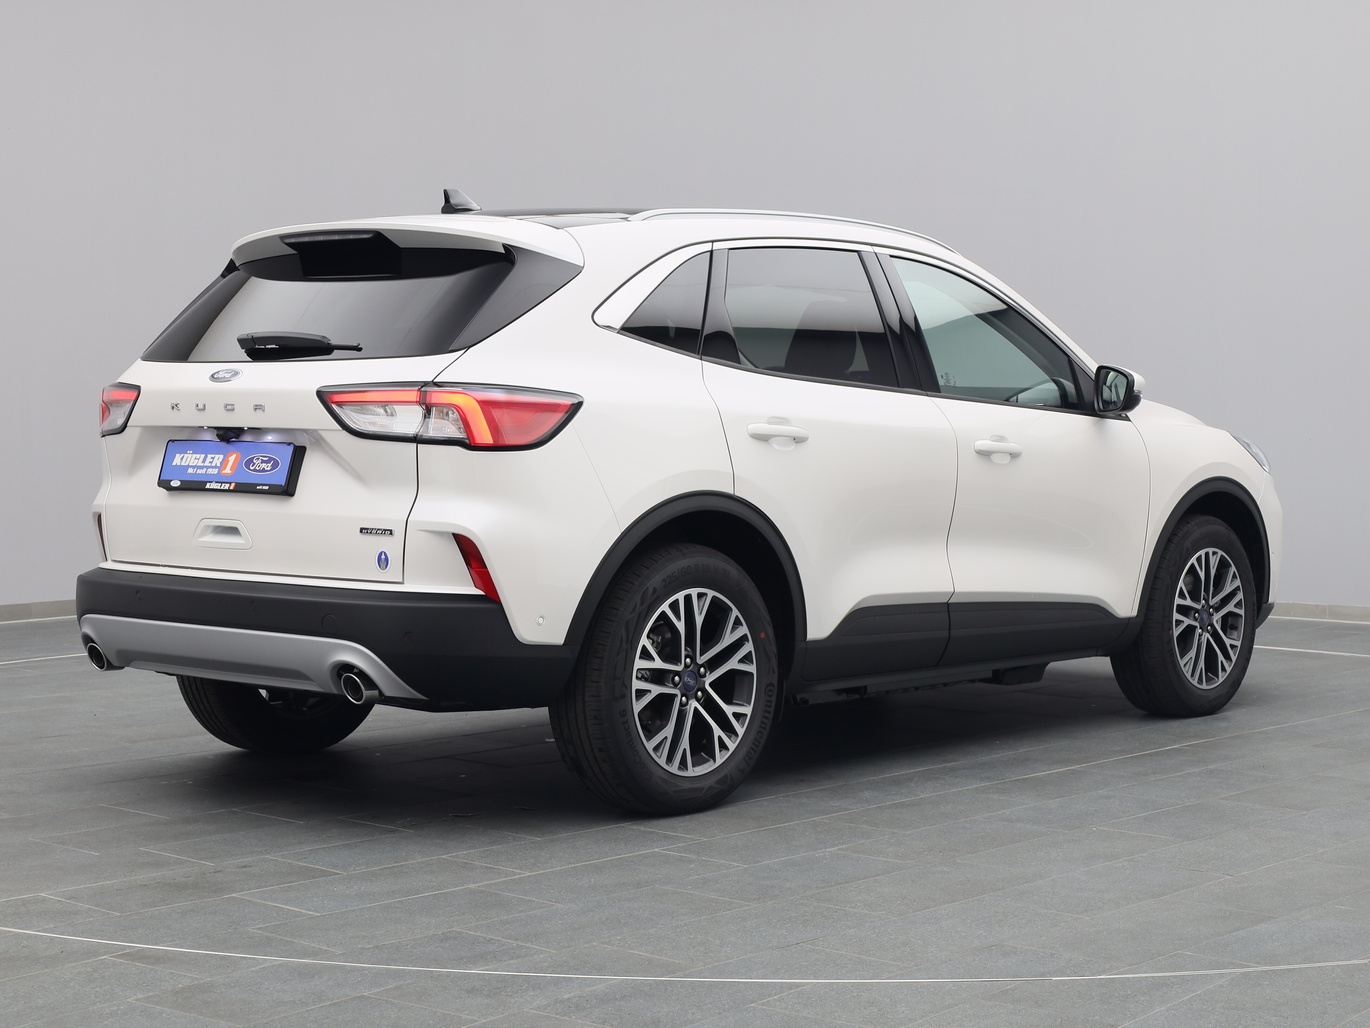  Ford Kuga Titanium X 225PS Plug-in-Hybrid Aut. in Weiss 